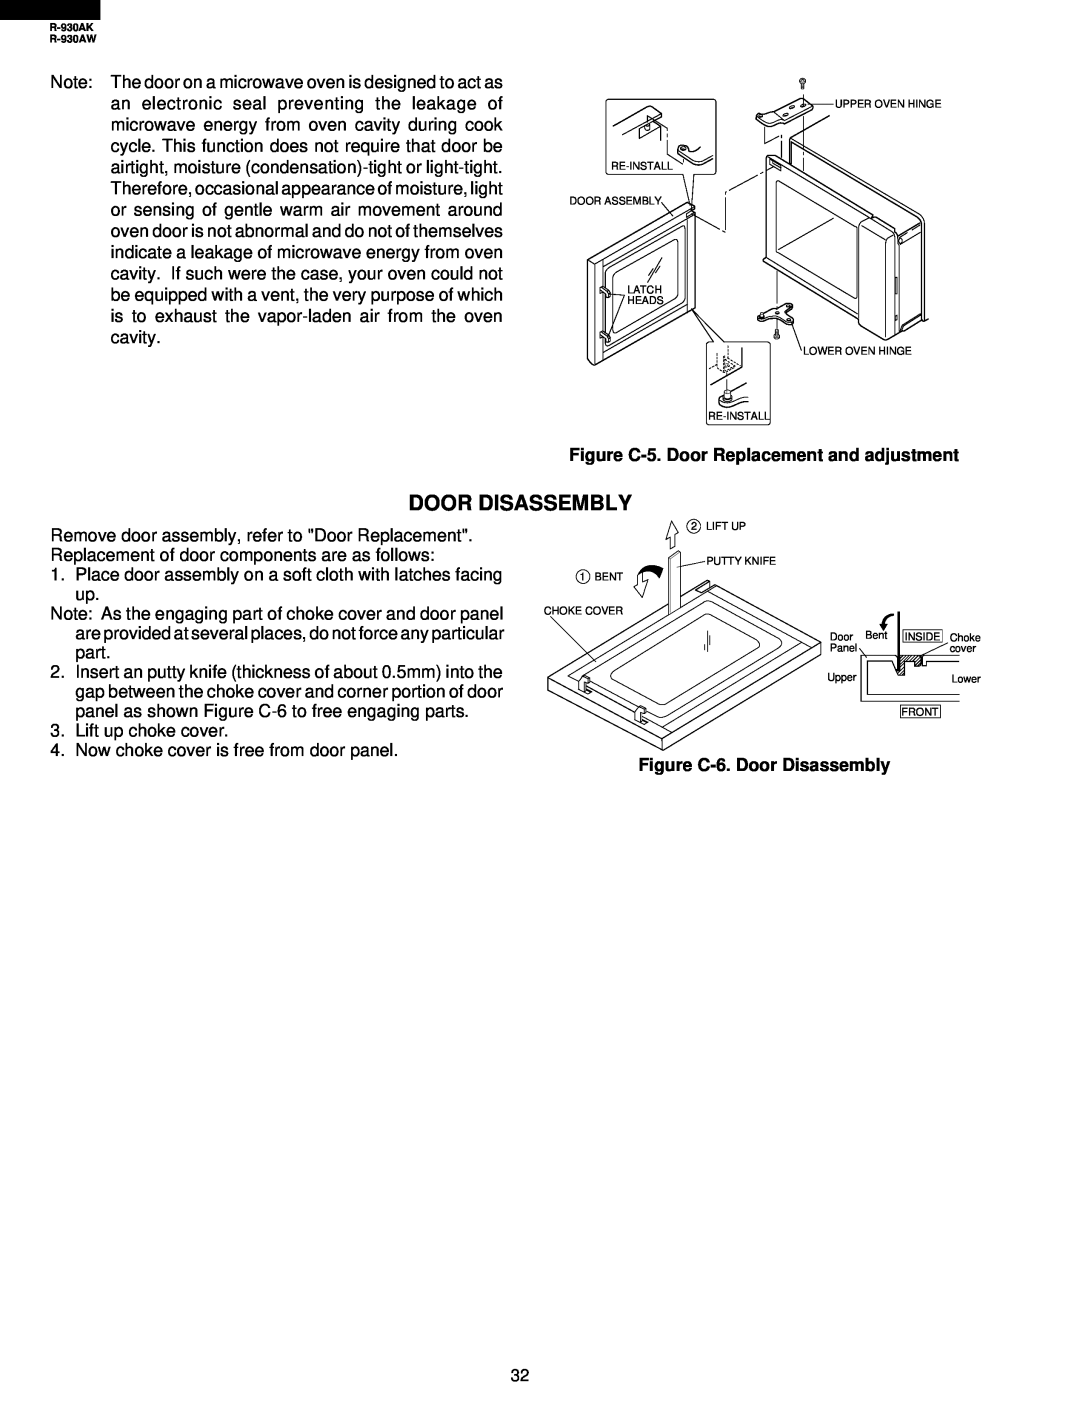 Sharp R-930AW service manual Figure C-5. Door Replacement and adjustment, Figure C-6. Door Disassembly 